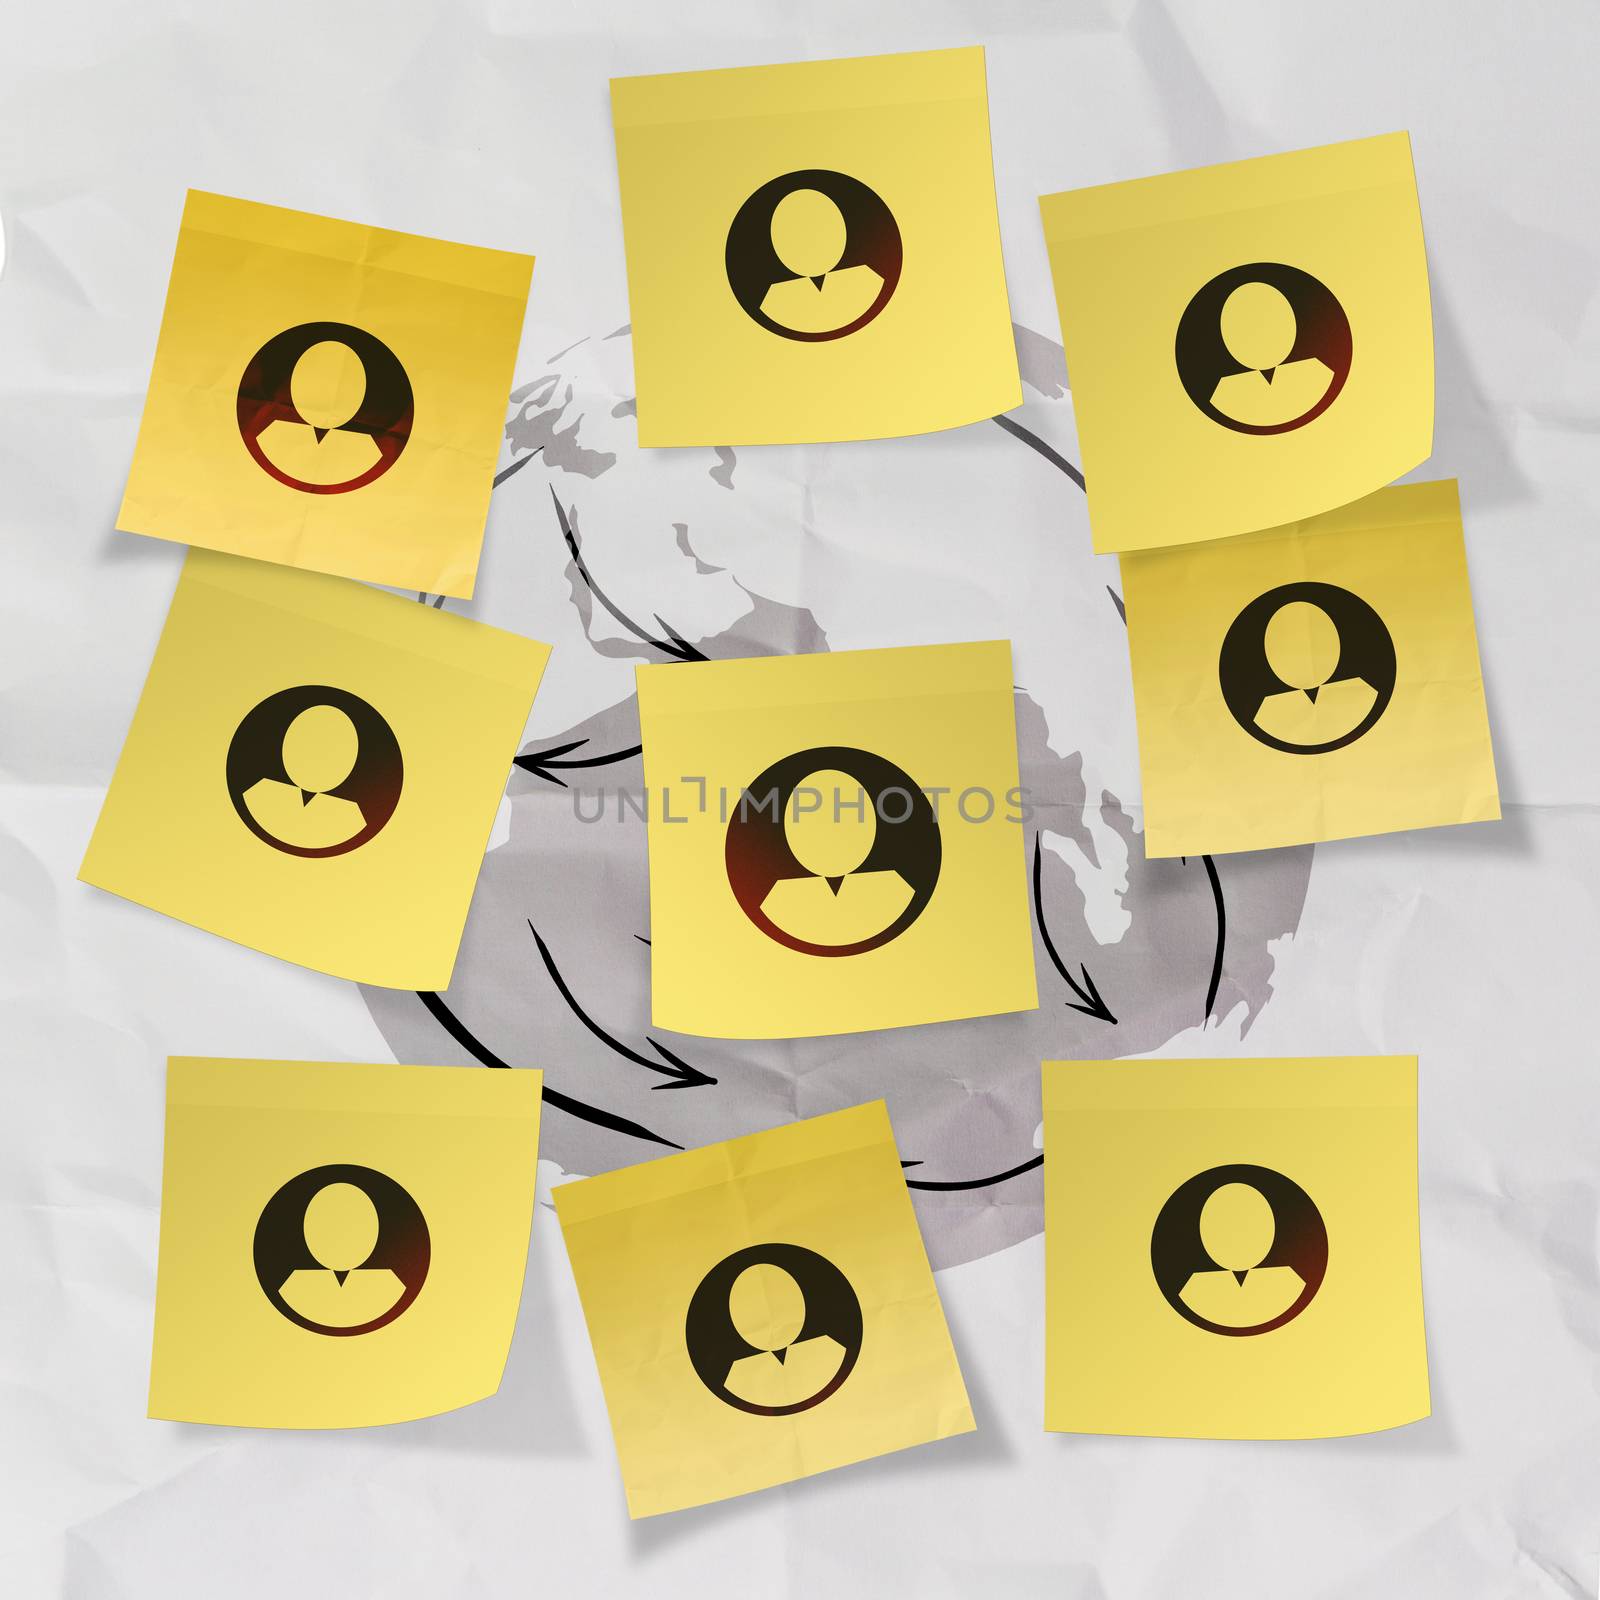  sticky note social network icon on crumpled paper background as concept